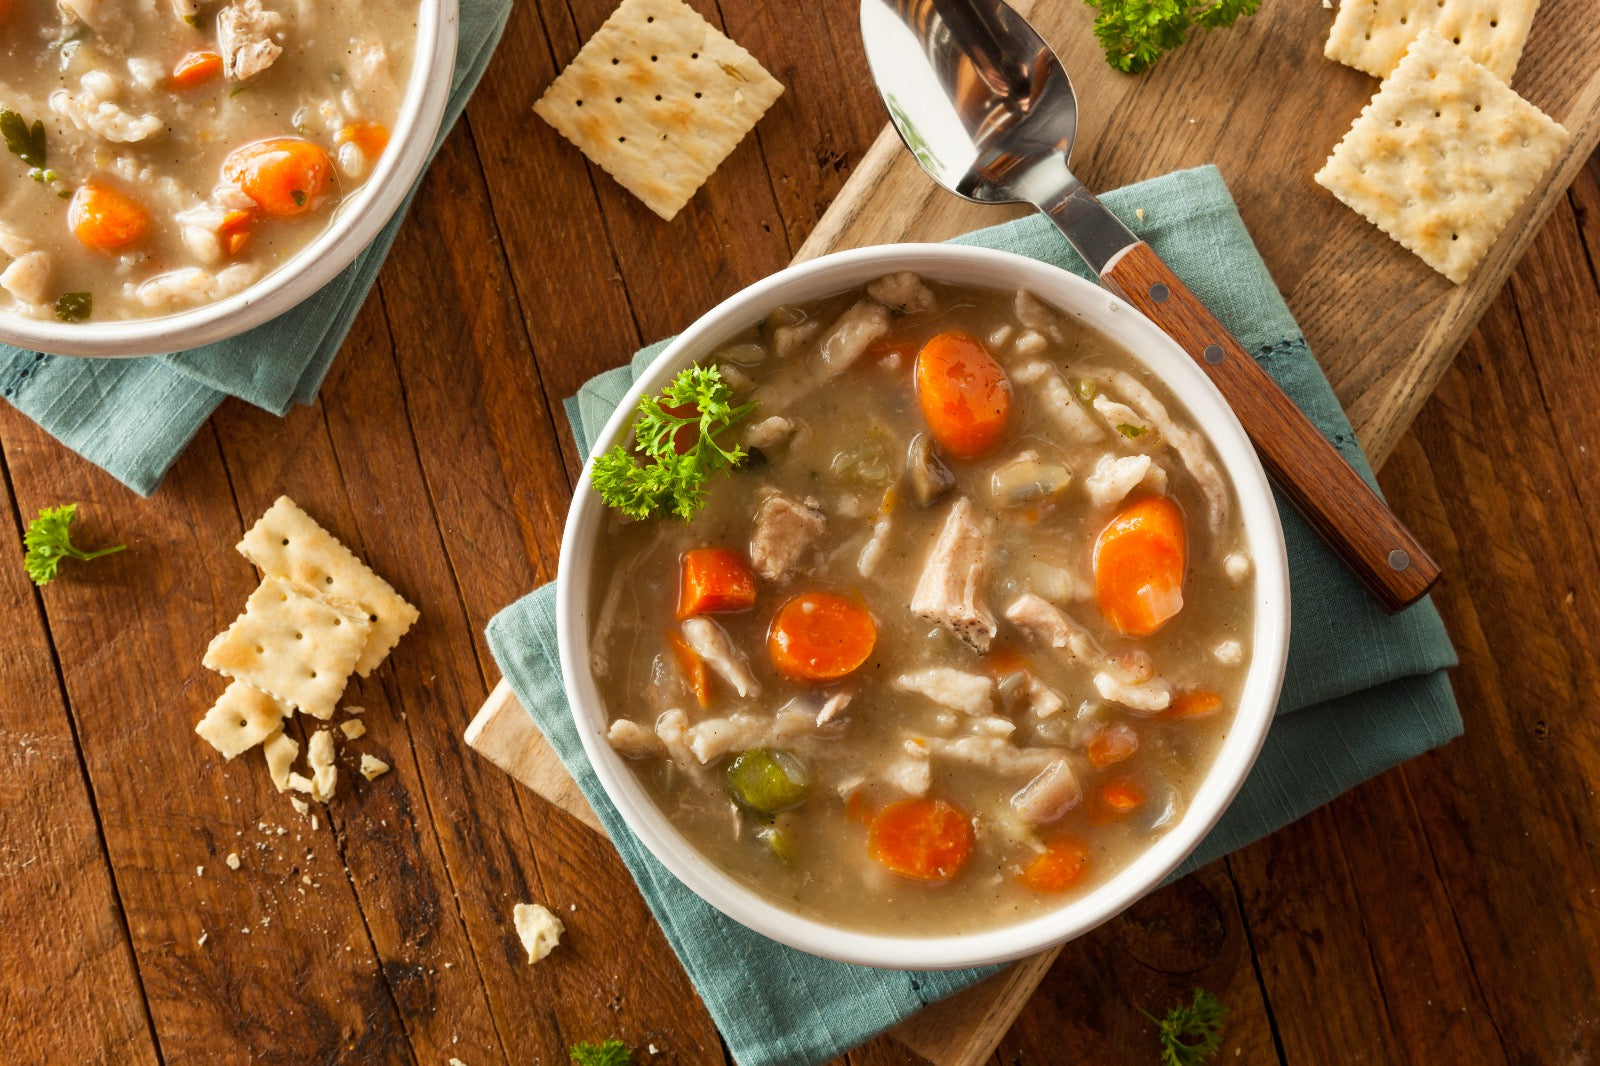 Top 5 Meat & Seafood Items That Can Help Build Immunity - Homemade Chicken Noodle Soup - Beck & Bulow